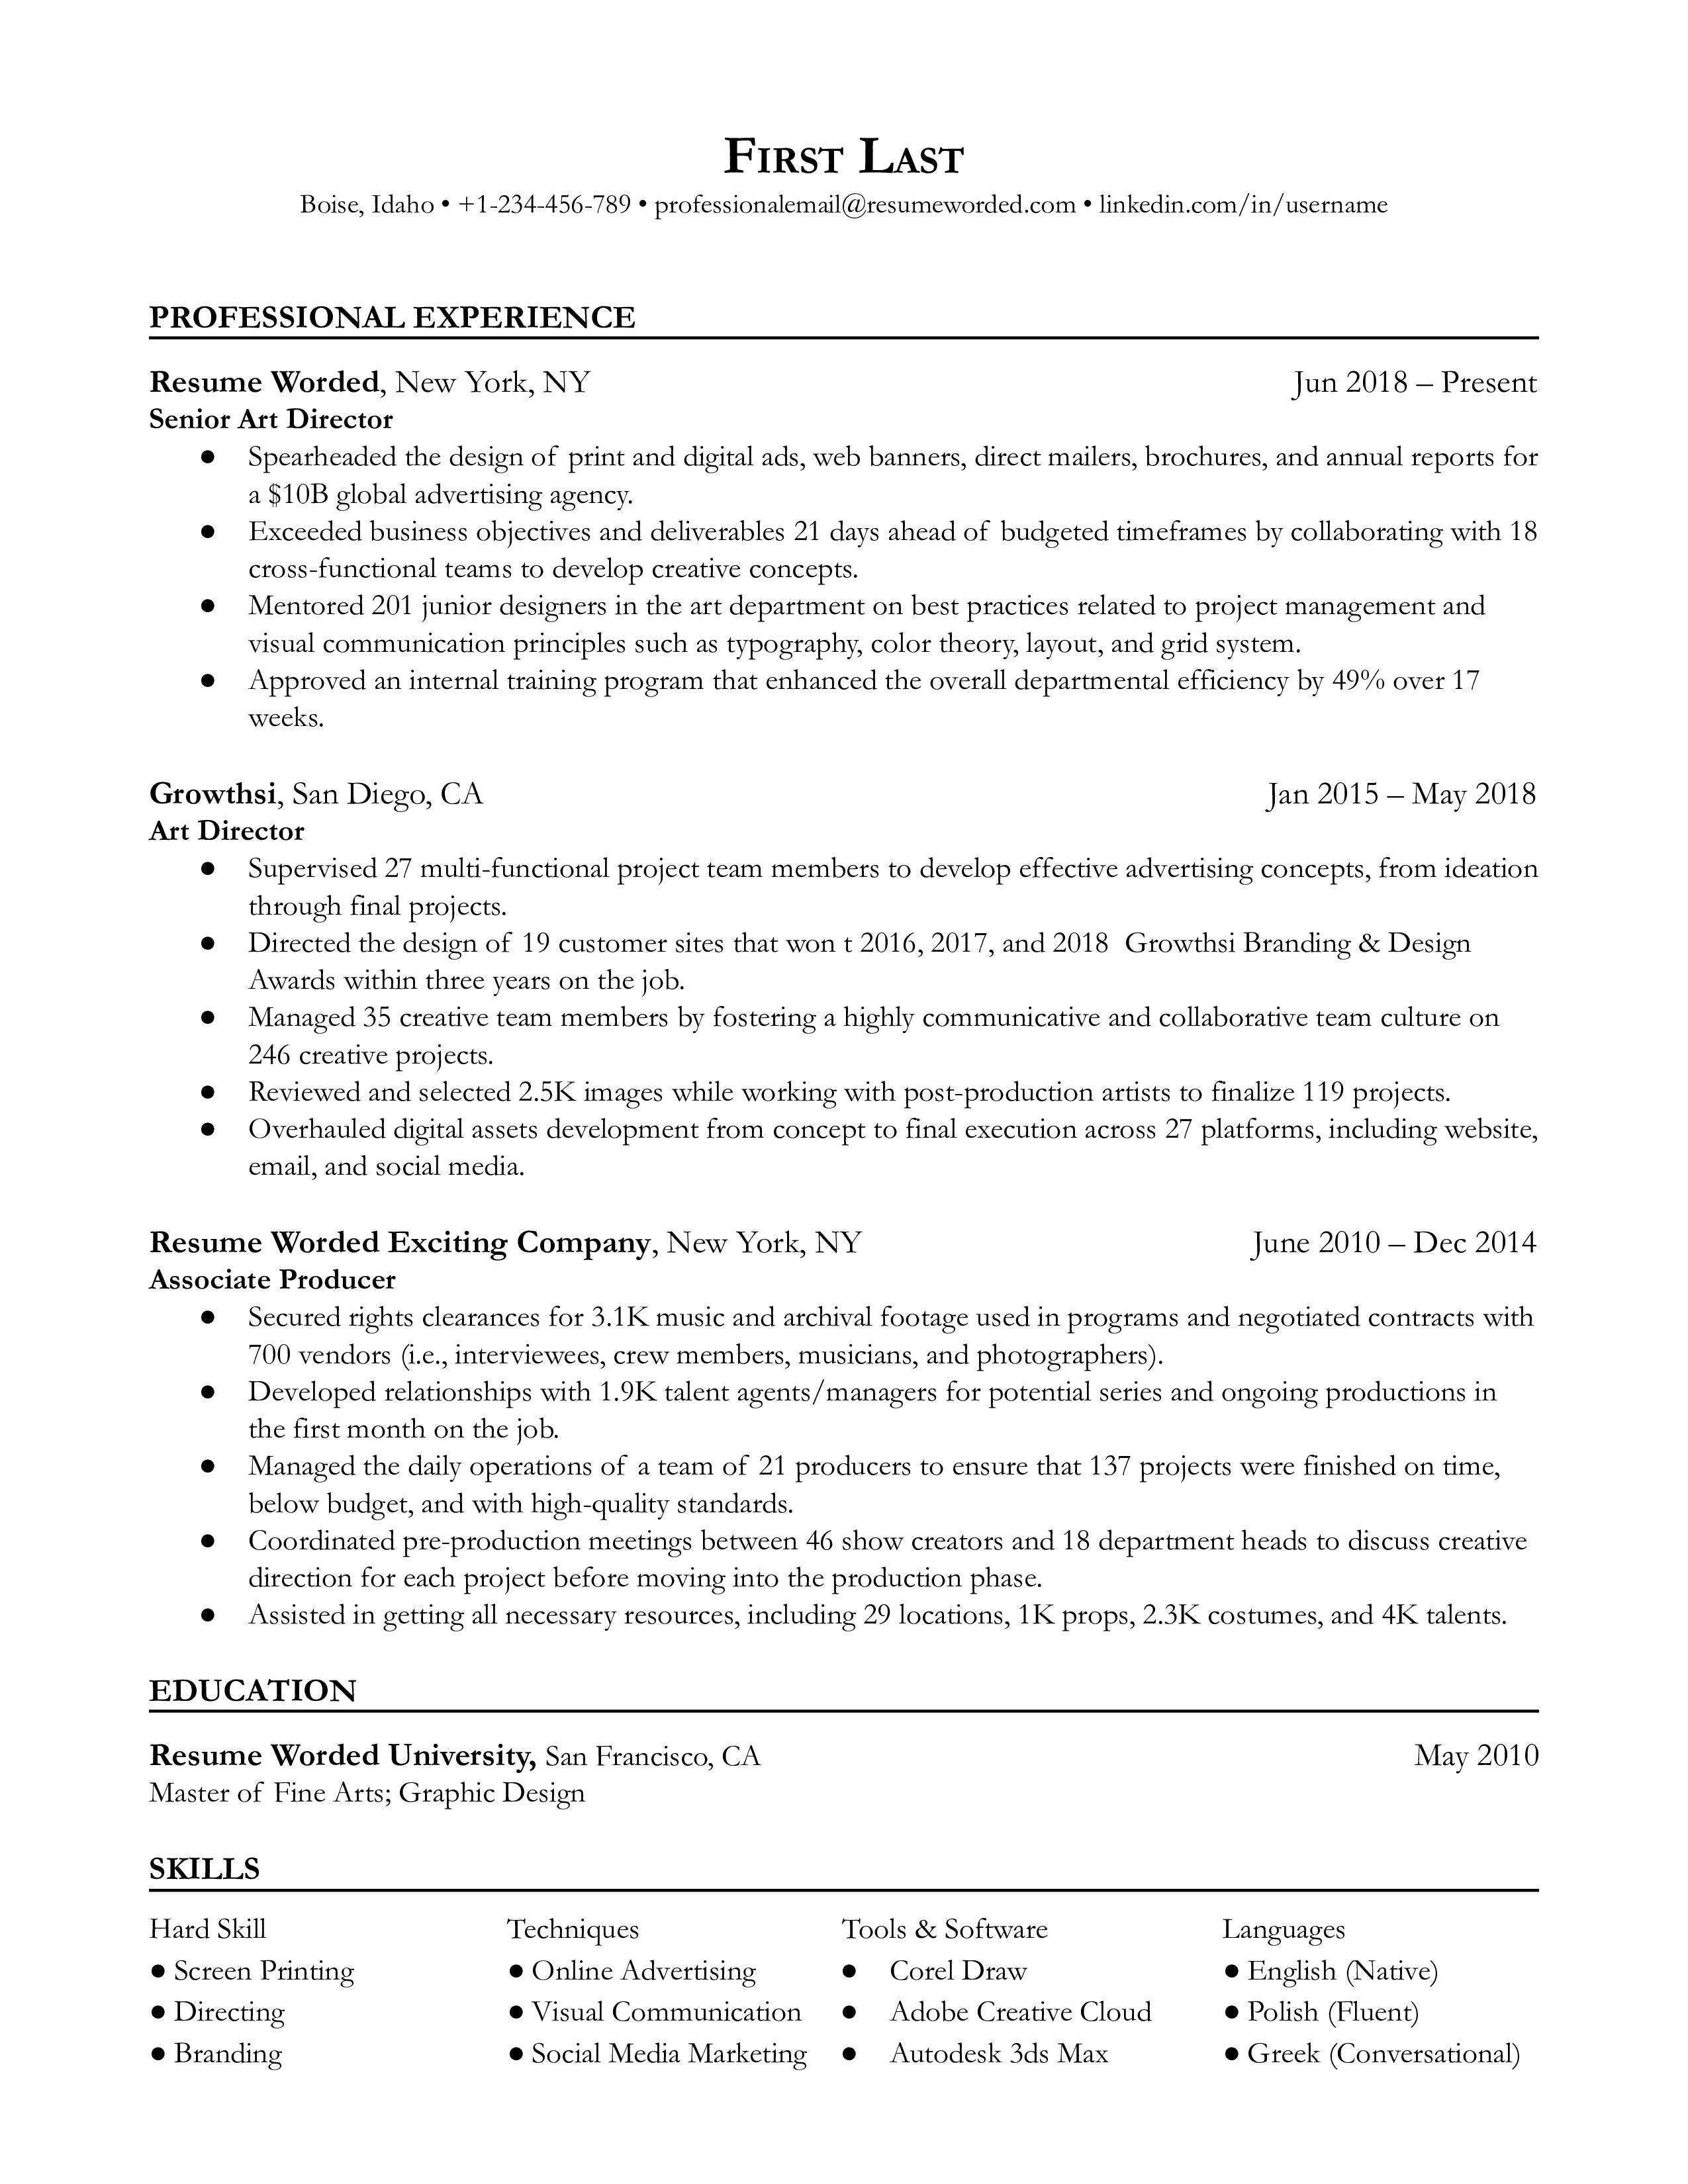 A senior art director’s resume sample that highlight’s the applicant’s leadership experience and communication skills.